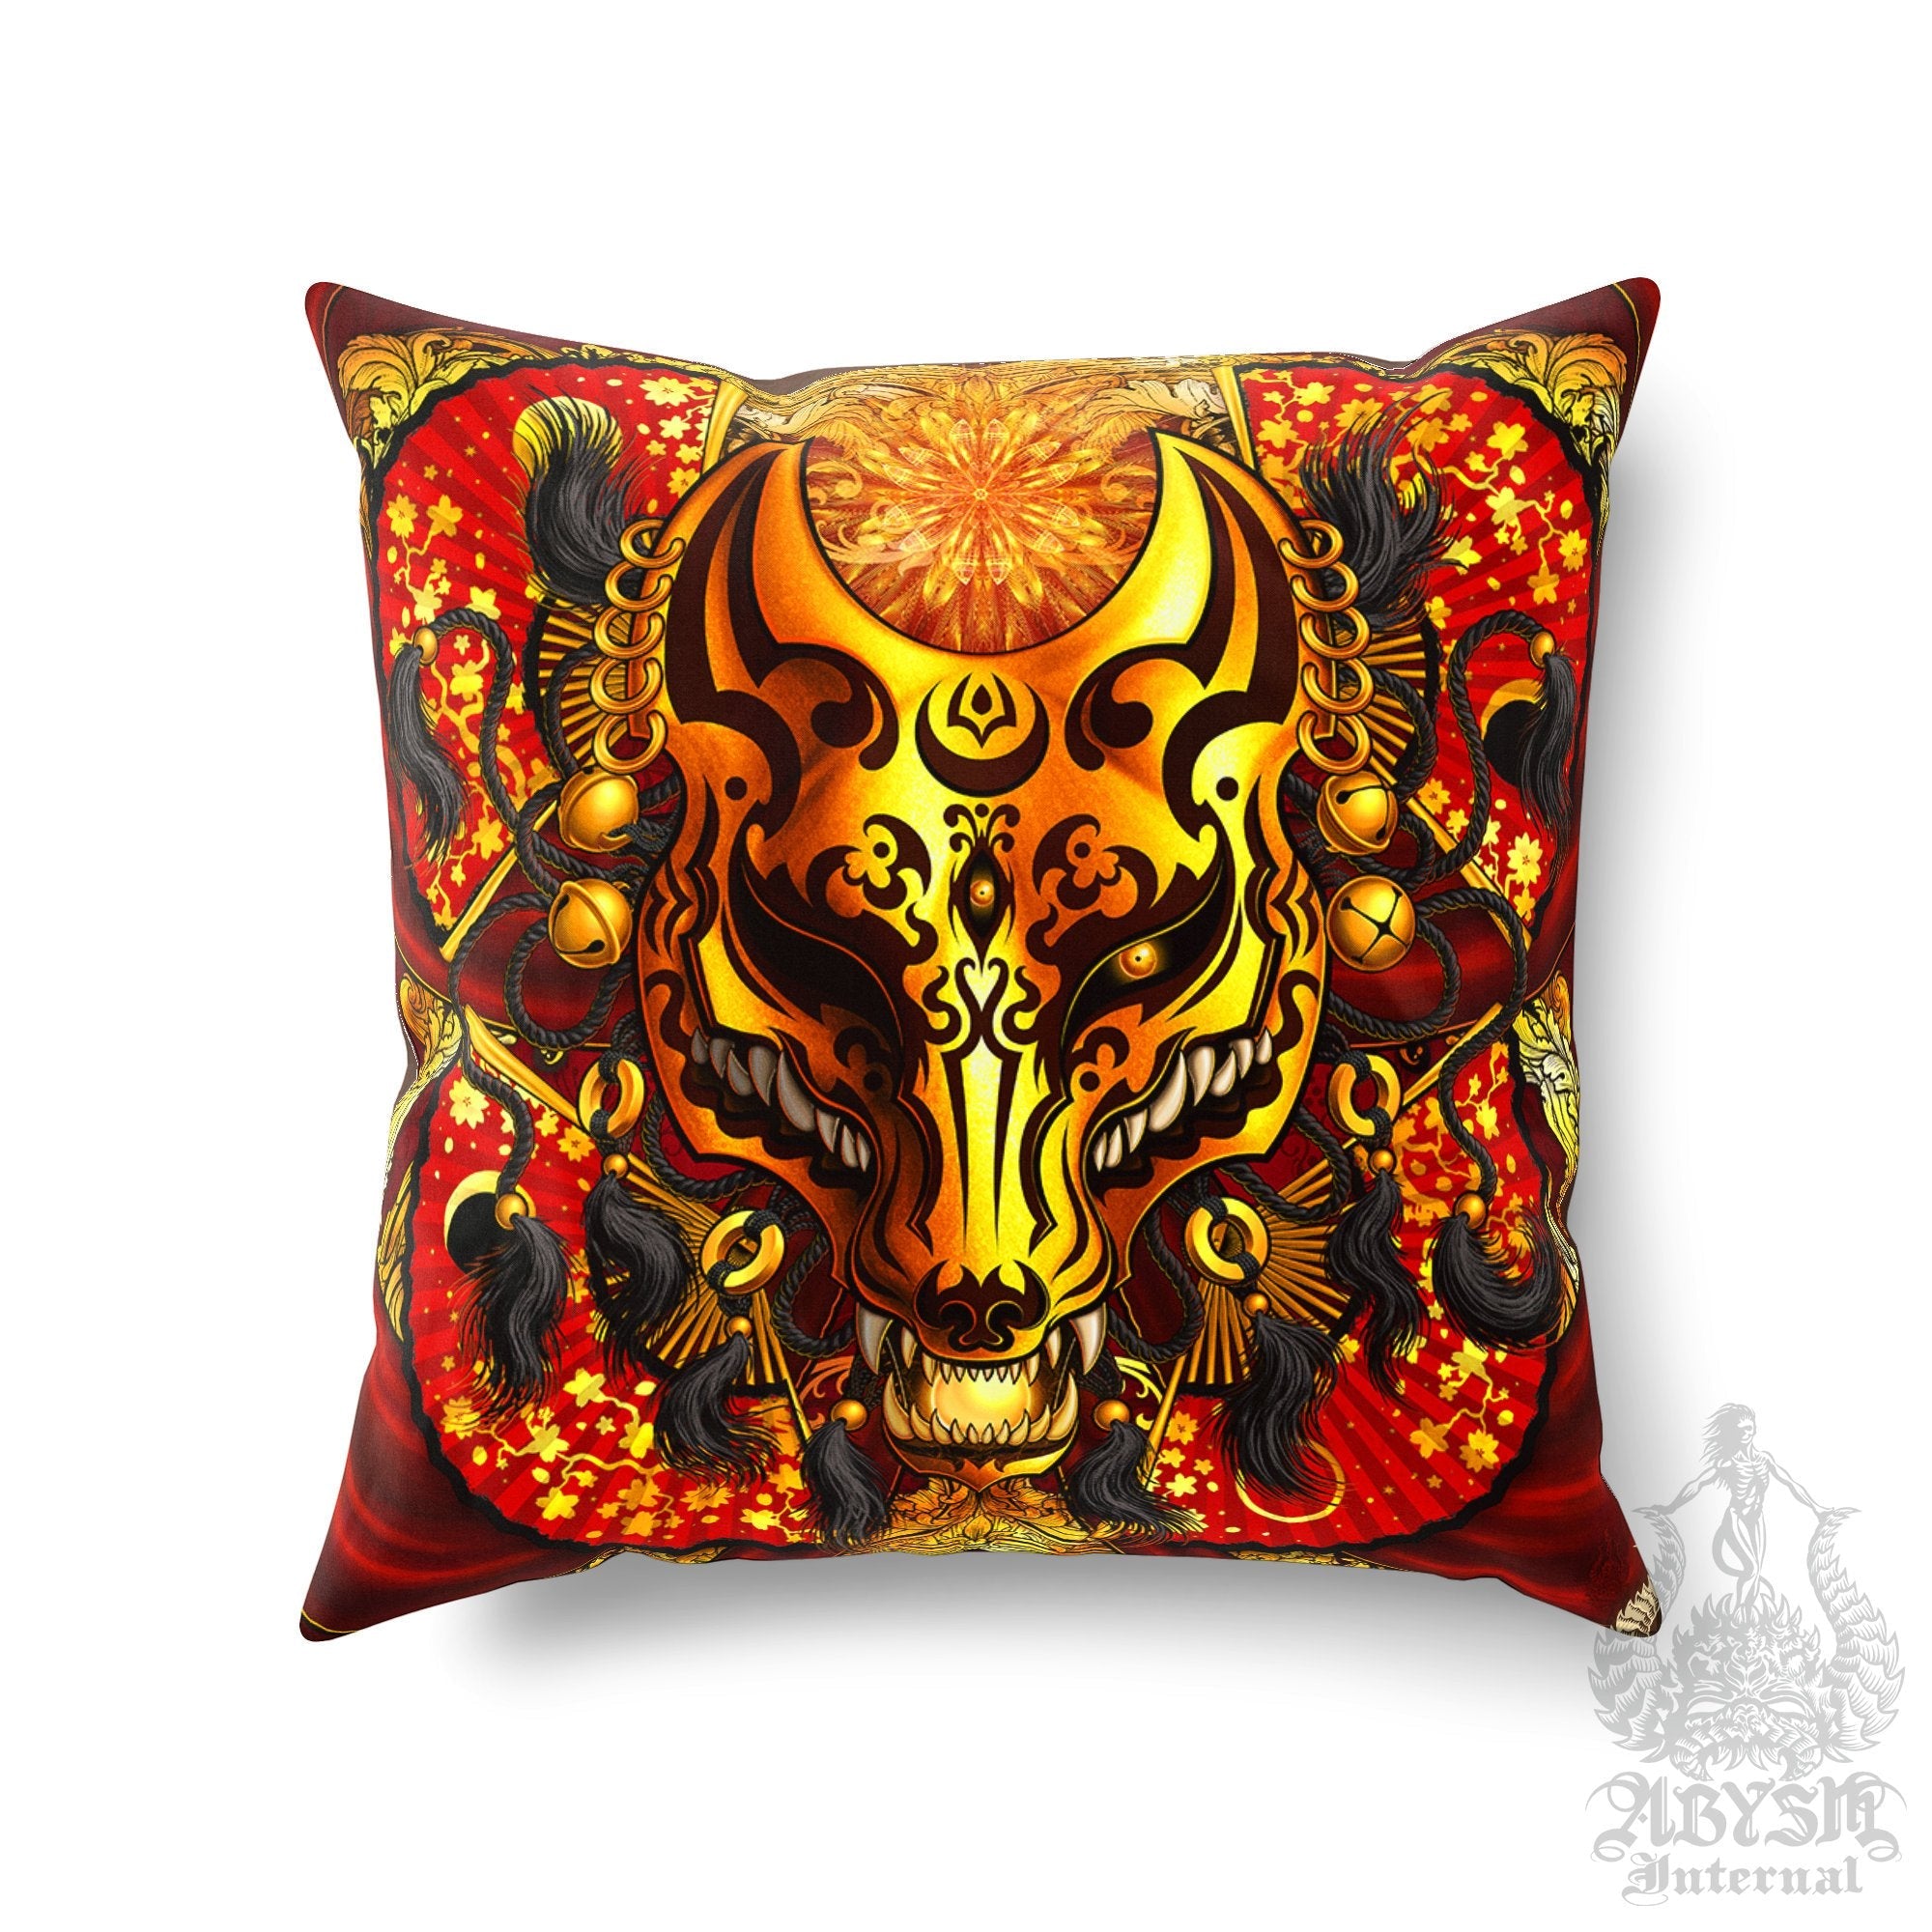 Kitsune Throw Pillow, Decorative Accent Cushion, Japanese Fox Mask, Okami, Anime and Gamer Room Decor, Eclectic Design, Funky Home - Gold - Abysm Internal